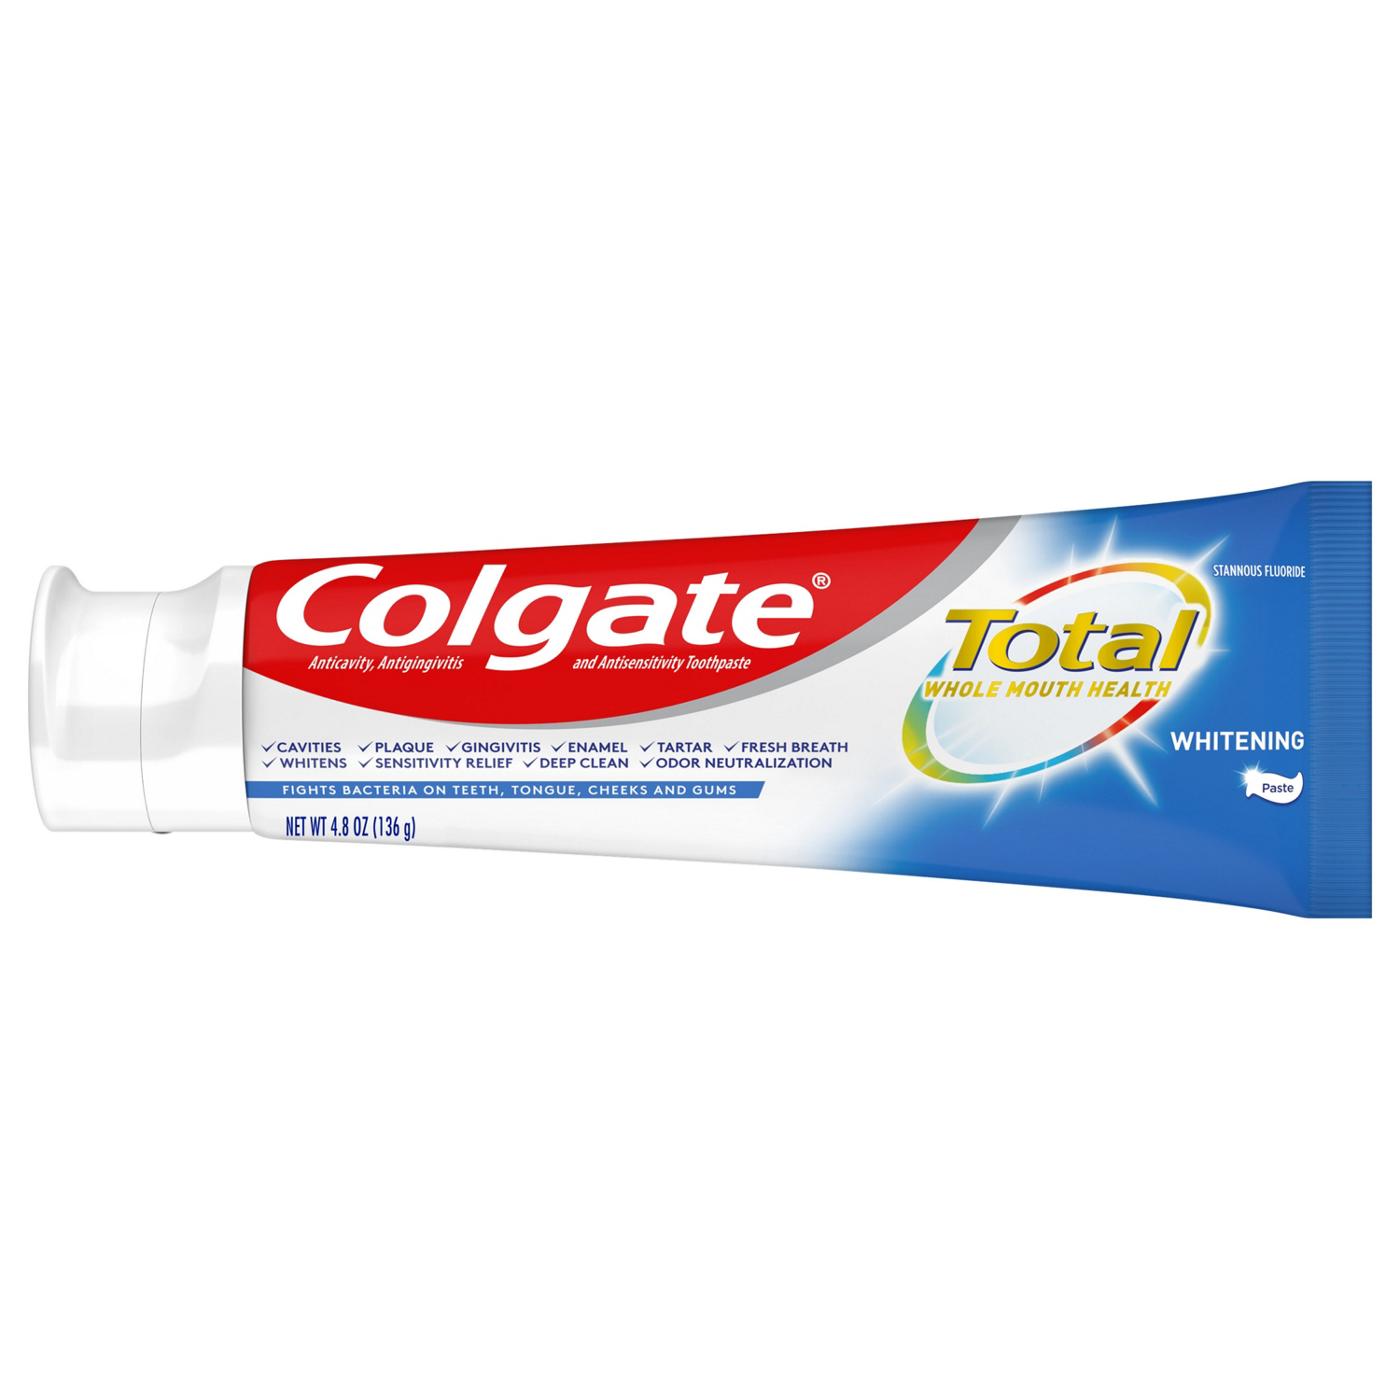 Colgate Total Whitening Toothpaste, 2 Pk; image 16 of 18